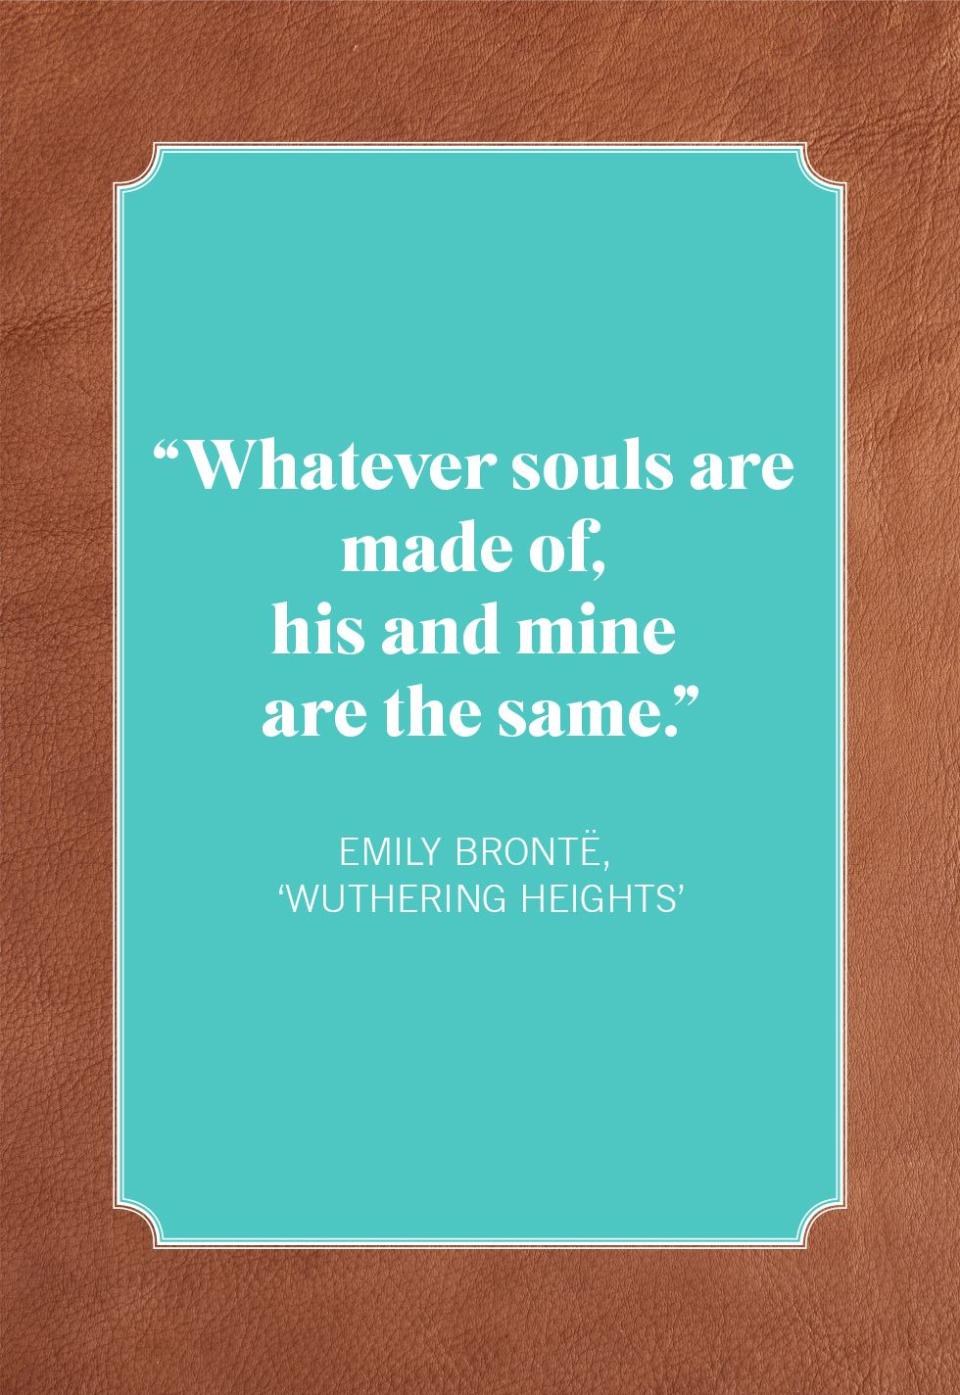 Emily Brontë, 'Wuthering Heights'